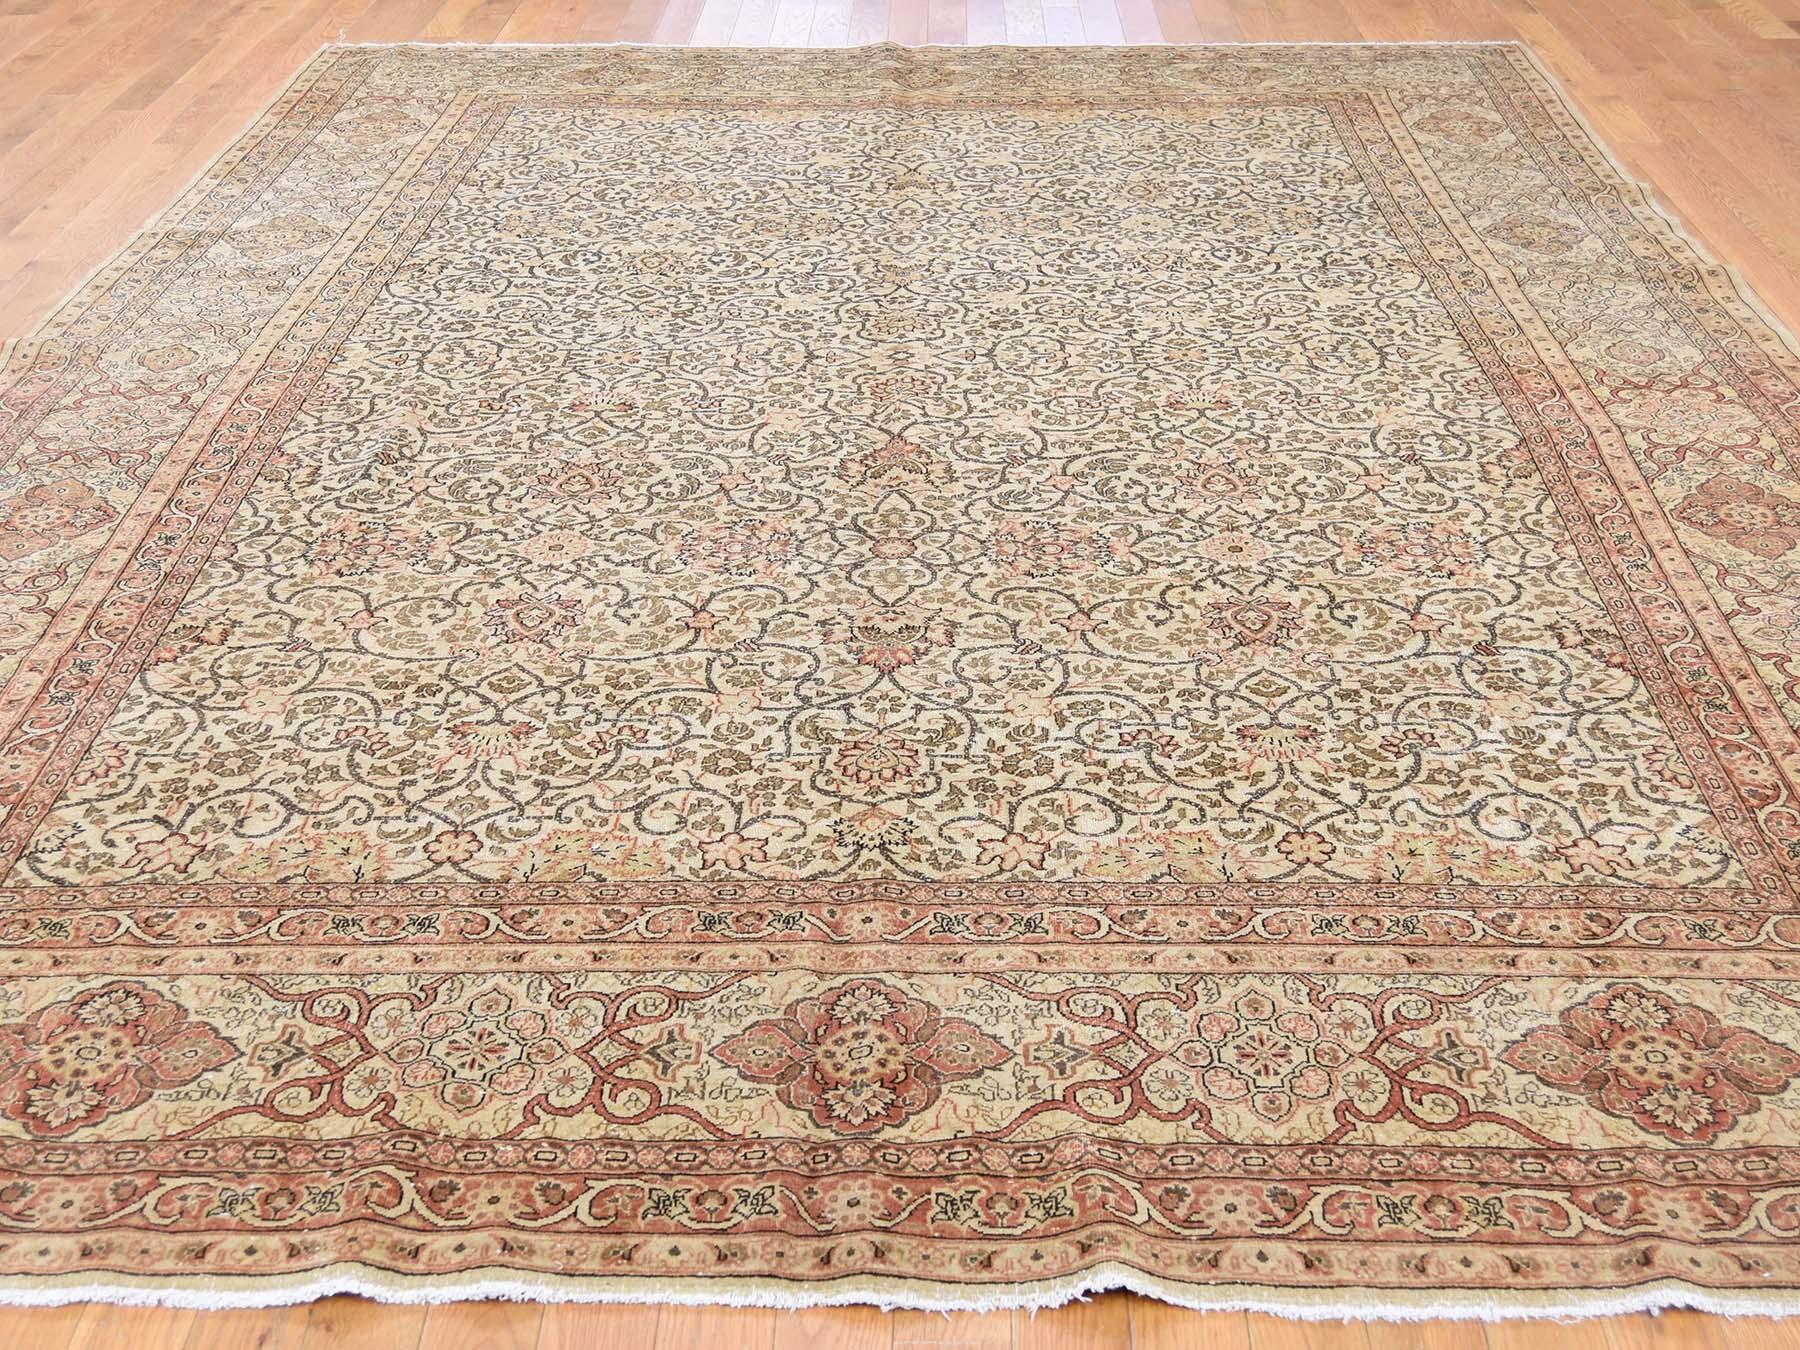 Early 20th Century 1920 Vintage Persian Tabriz Hand-Knotted Wool Full Pile Rug 